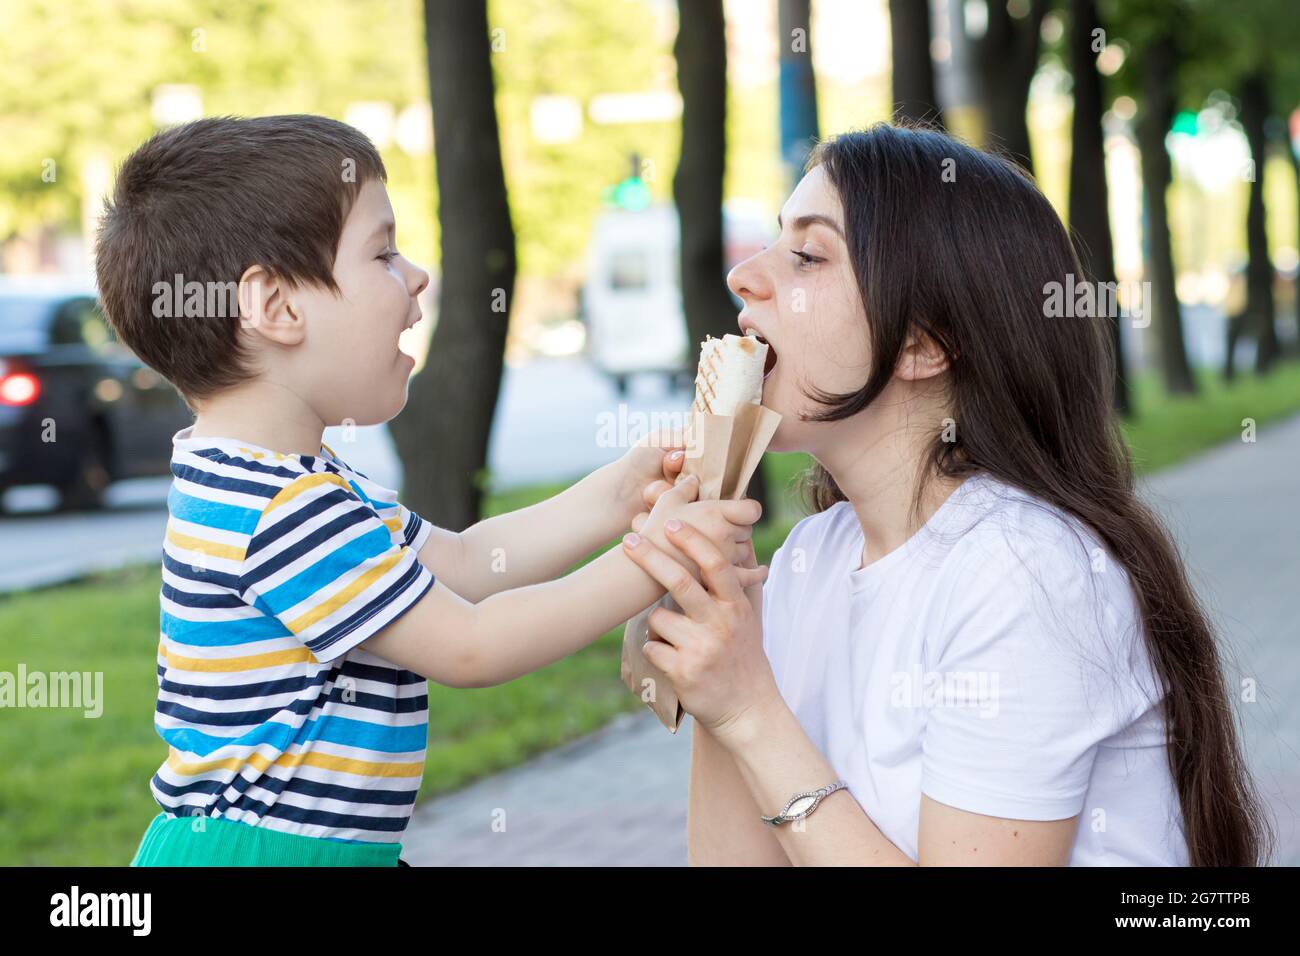 A baby boy feeds his mother a shaurma in the street. Advertising fast food and street food. Stock Photo